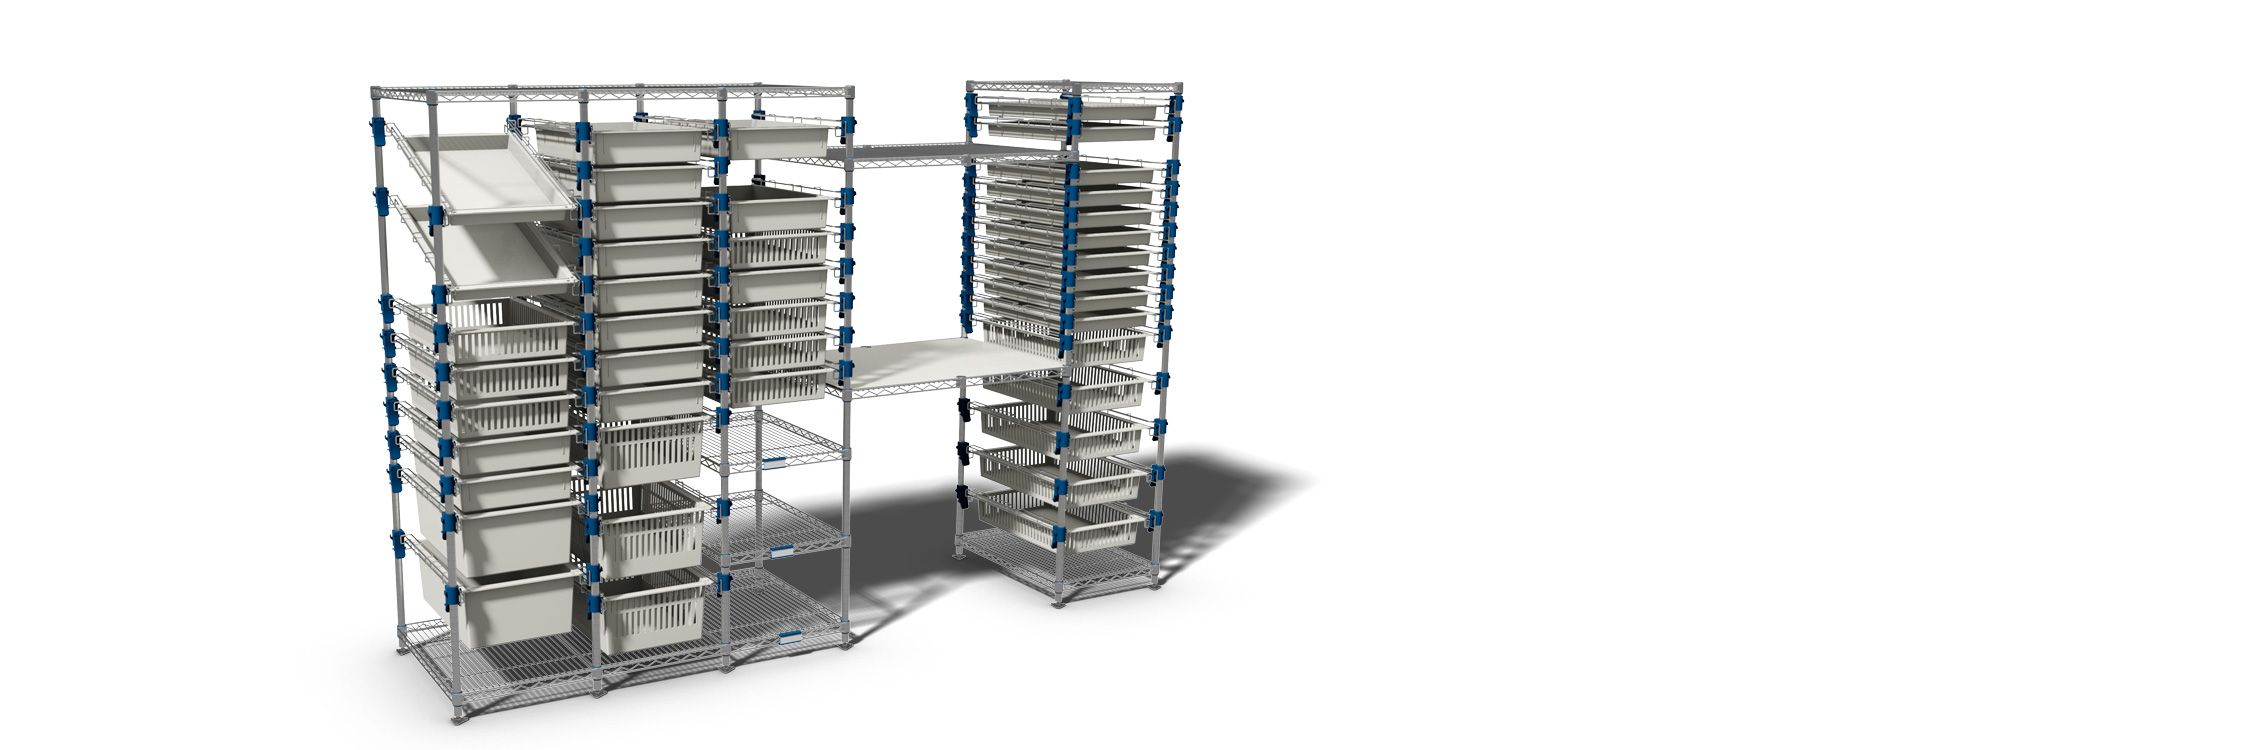 a large and complex version of the MOSYS-ISO modular shelving system, compatible with the ISO 600x400 standard